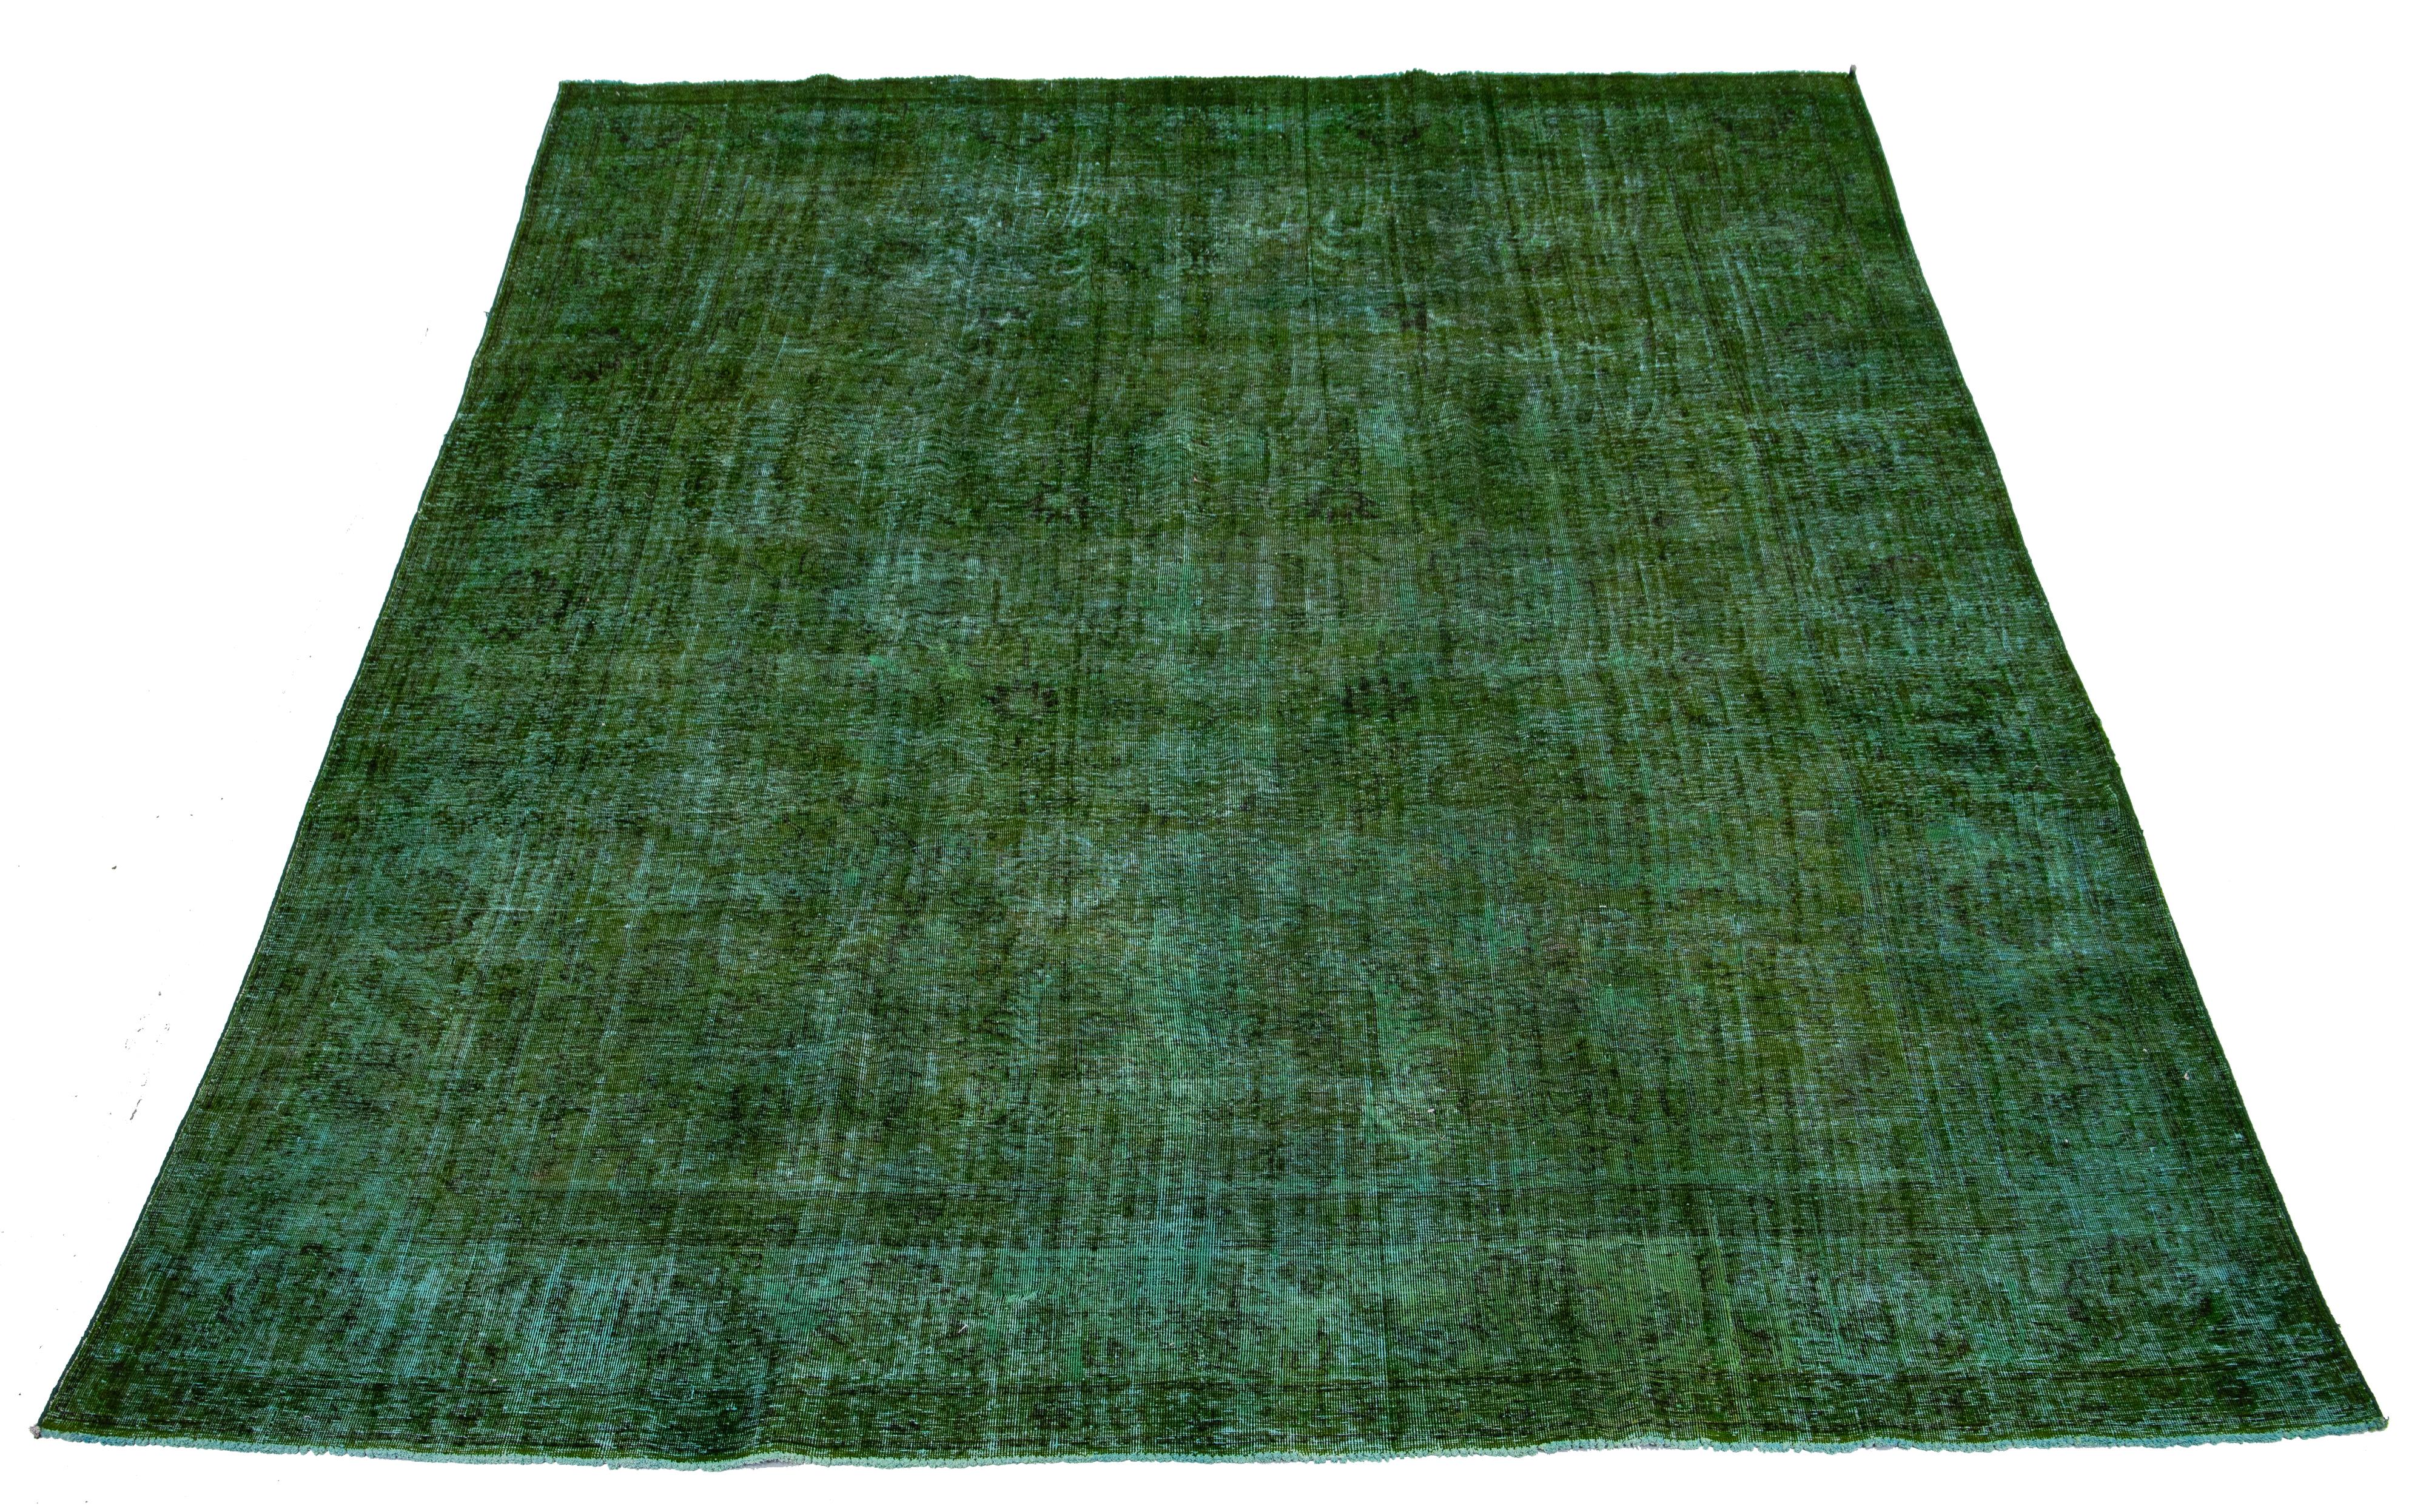 Beautiful Vintage overdyed hand knotted wool rug with a green field. This Persian rug has brown accents in an all-over design.

This rug measures: 9'8'' x 12'11